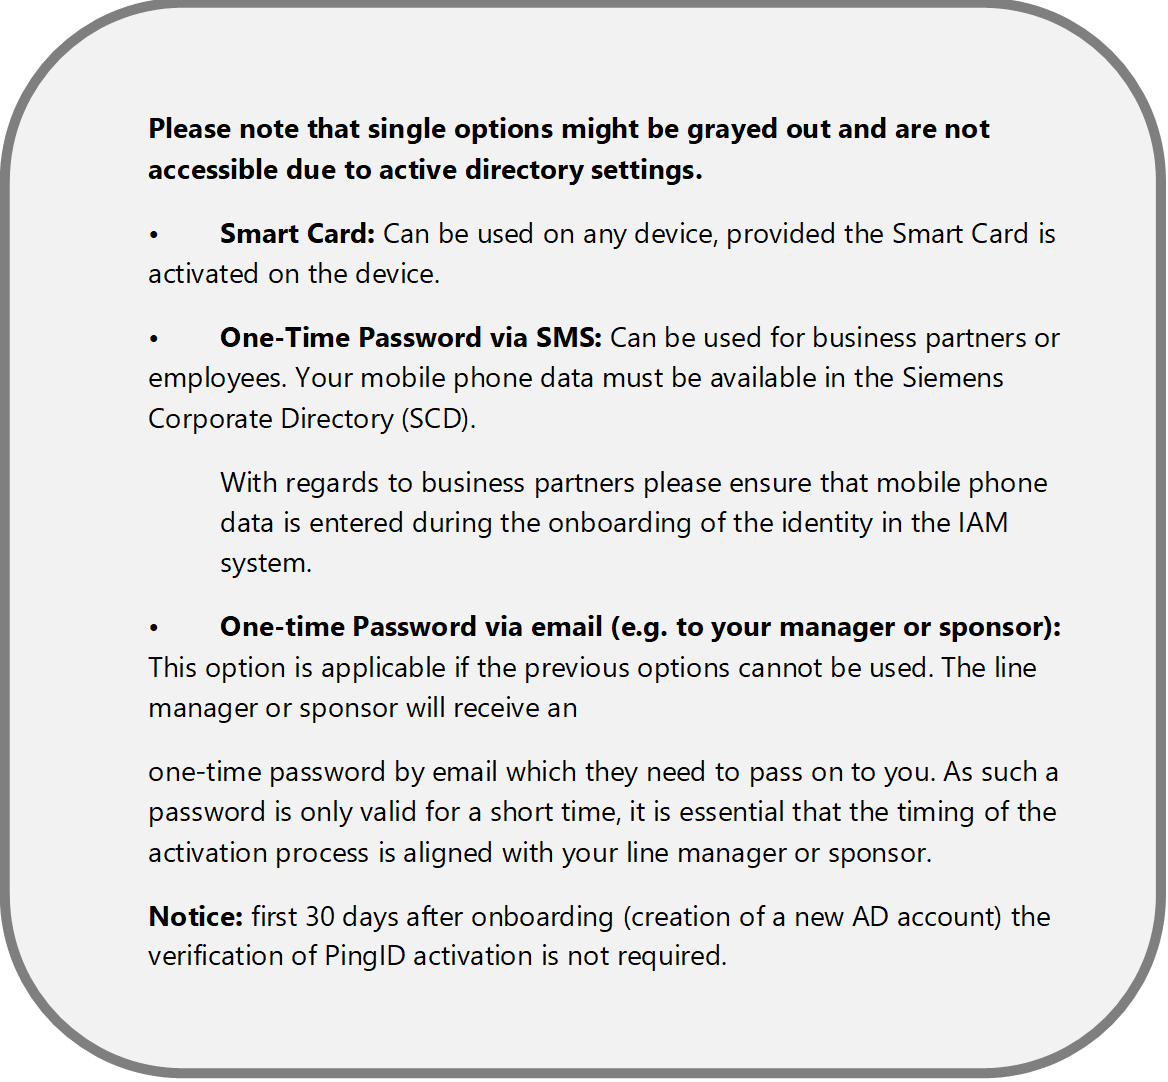 Please note that single options might be grayed out and are not accessible due to active directory settings.
	Smart Card: Can be used on any device, provided the Smart Card is activated on the device.
	One-Time Password via SMS: Can be used for business partners or employees. Your mobile phone data must be available in the Siemens Corporate Directory (SCD). 
With regards to business partners please ensure that mobile phone data is entered during the onboarding of the identity in the IAM system. 
	One-time Password via email (e.g. to your manager or sponsor): This option is applicable if the previous options cannot be used. The line manager or sponsor will receive an 
one-time password by email which they need to pass on to you. As such a password is only valid for a short time, it is essential that the timing of the activation process is aligned with your line manager or sponsor.
Notice: first 30 days after onboarding (creation of a new AD account) the verification of PingID activation is not required.
